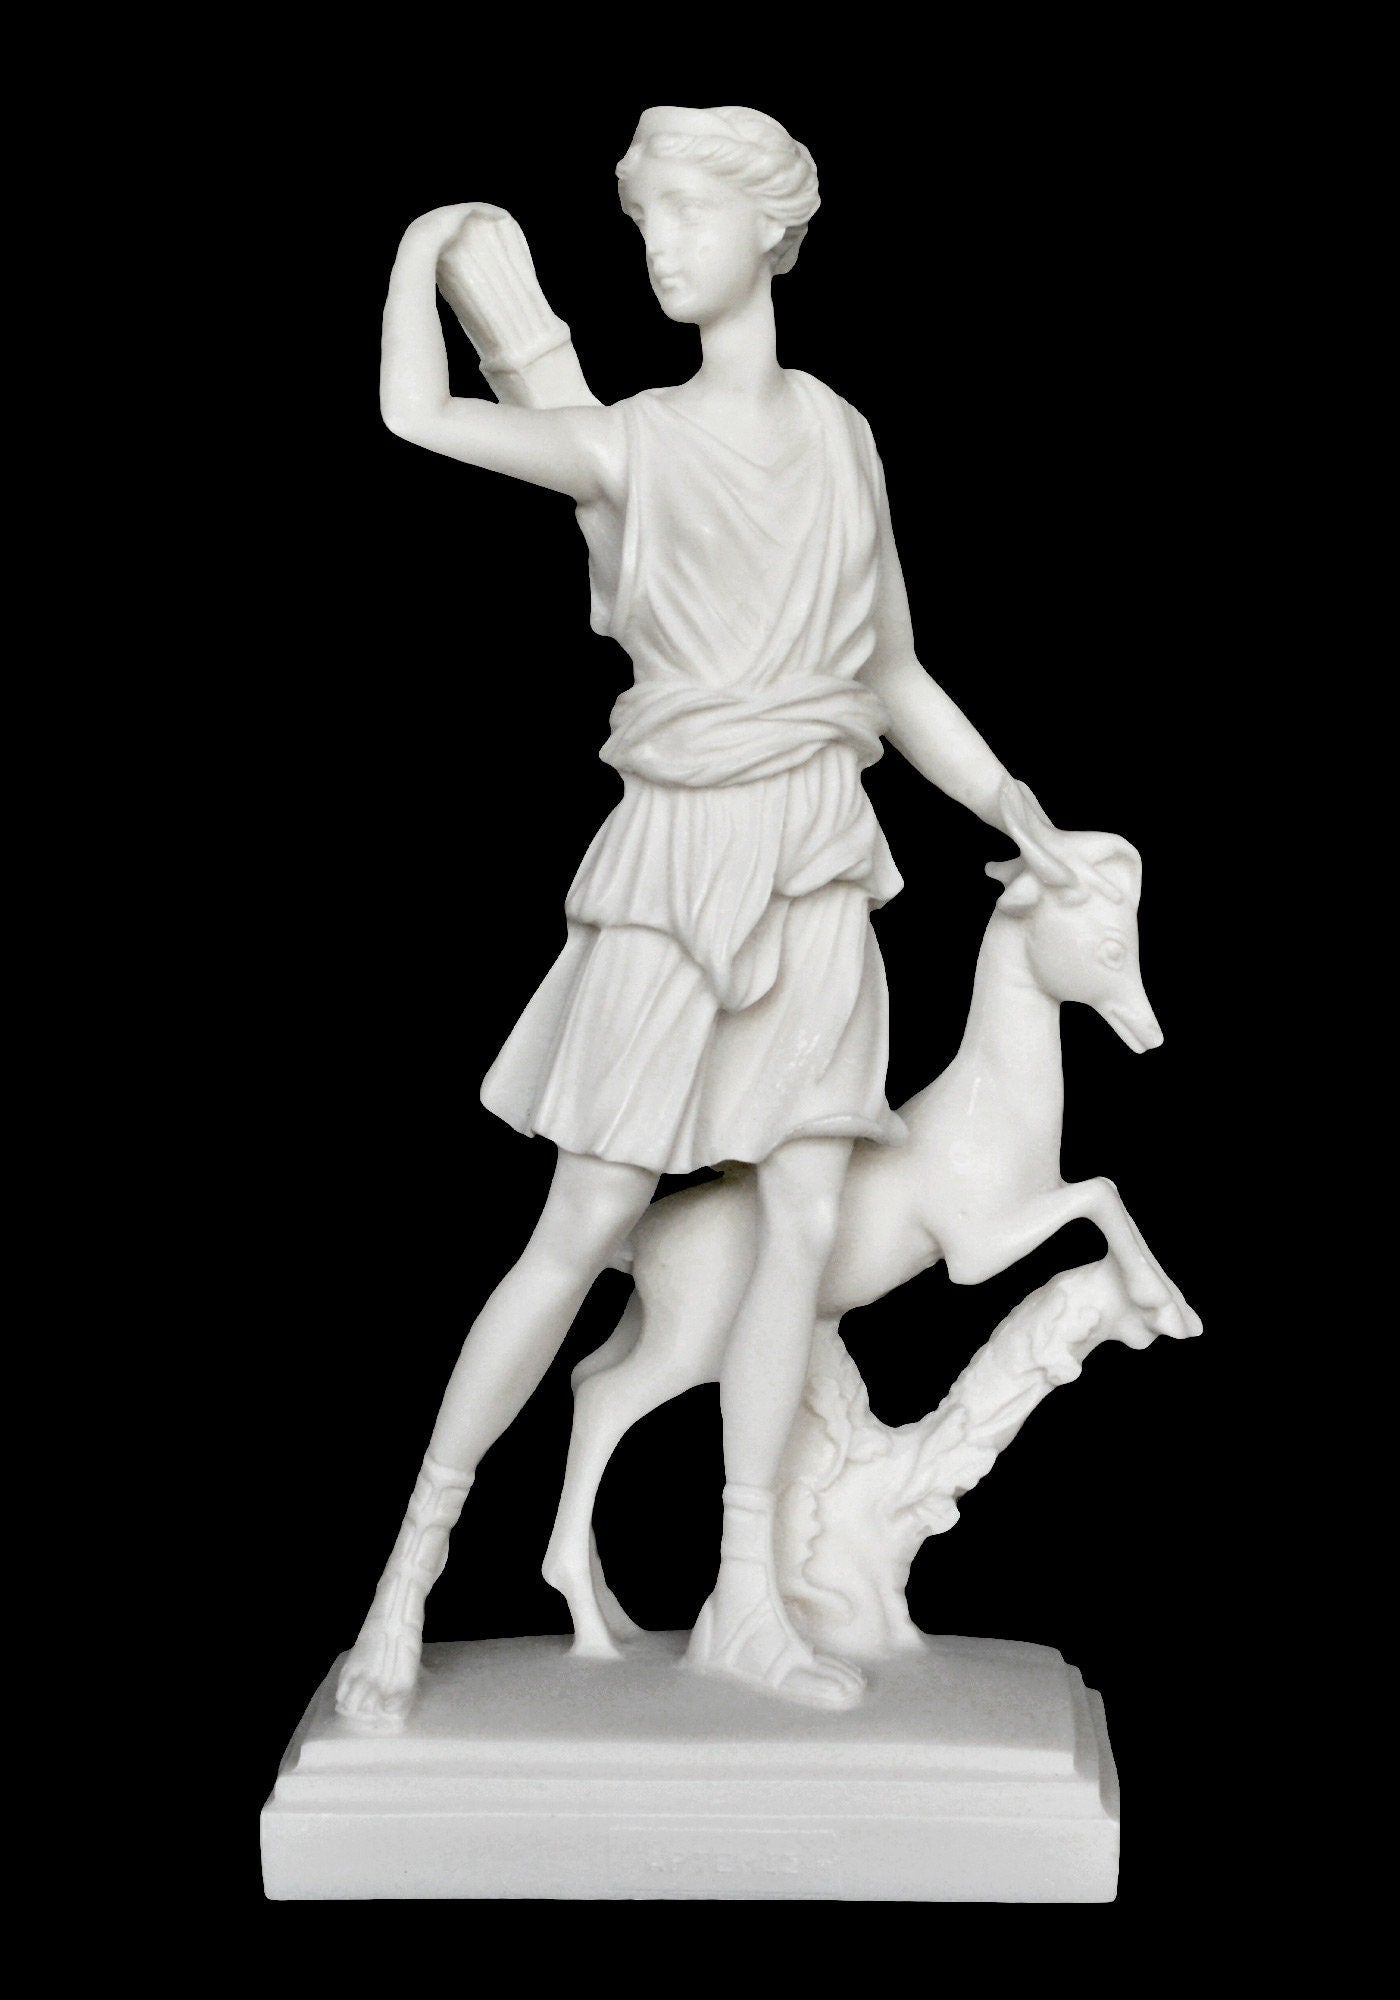 Artemis Diana – Greek Roman Goddess of Hunt, the Wilderness, Wild Animals, the Moon, and Chastity - Sister of Apollo - Αlabaster Statue